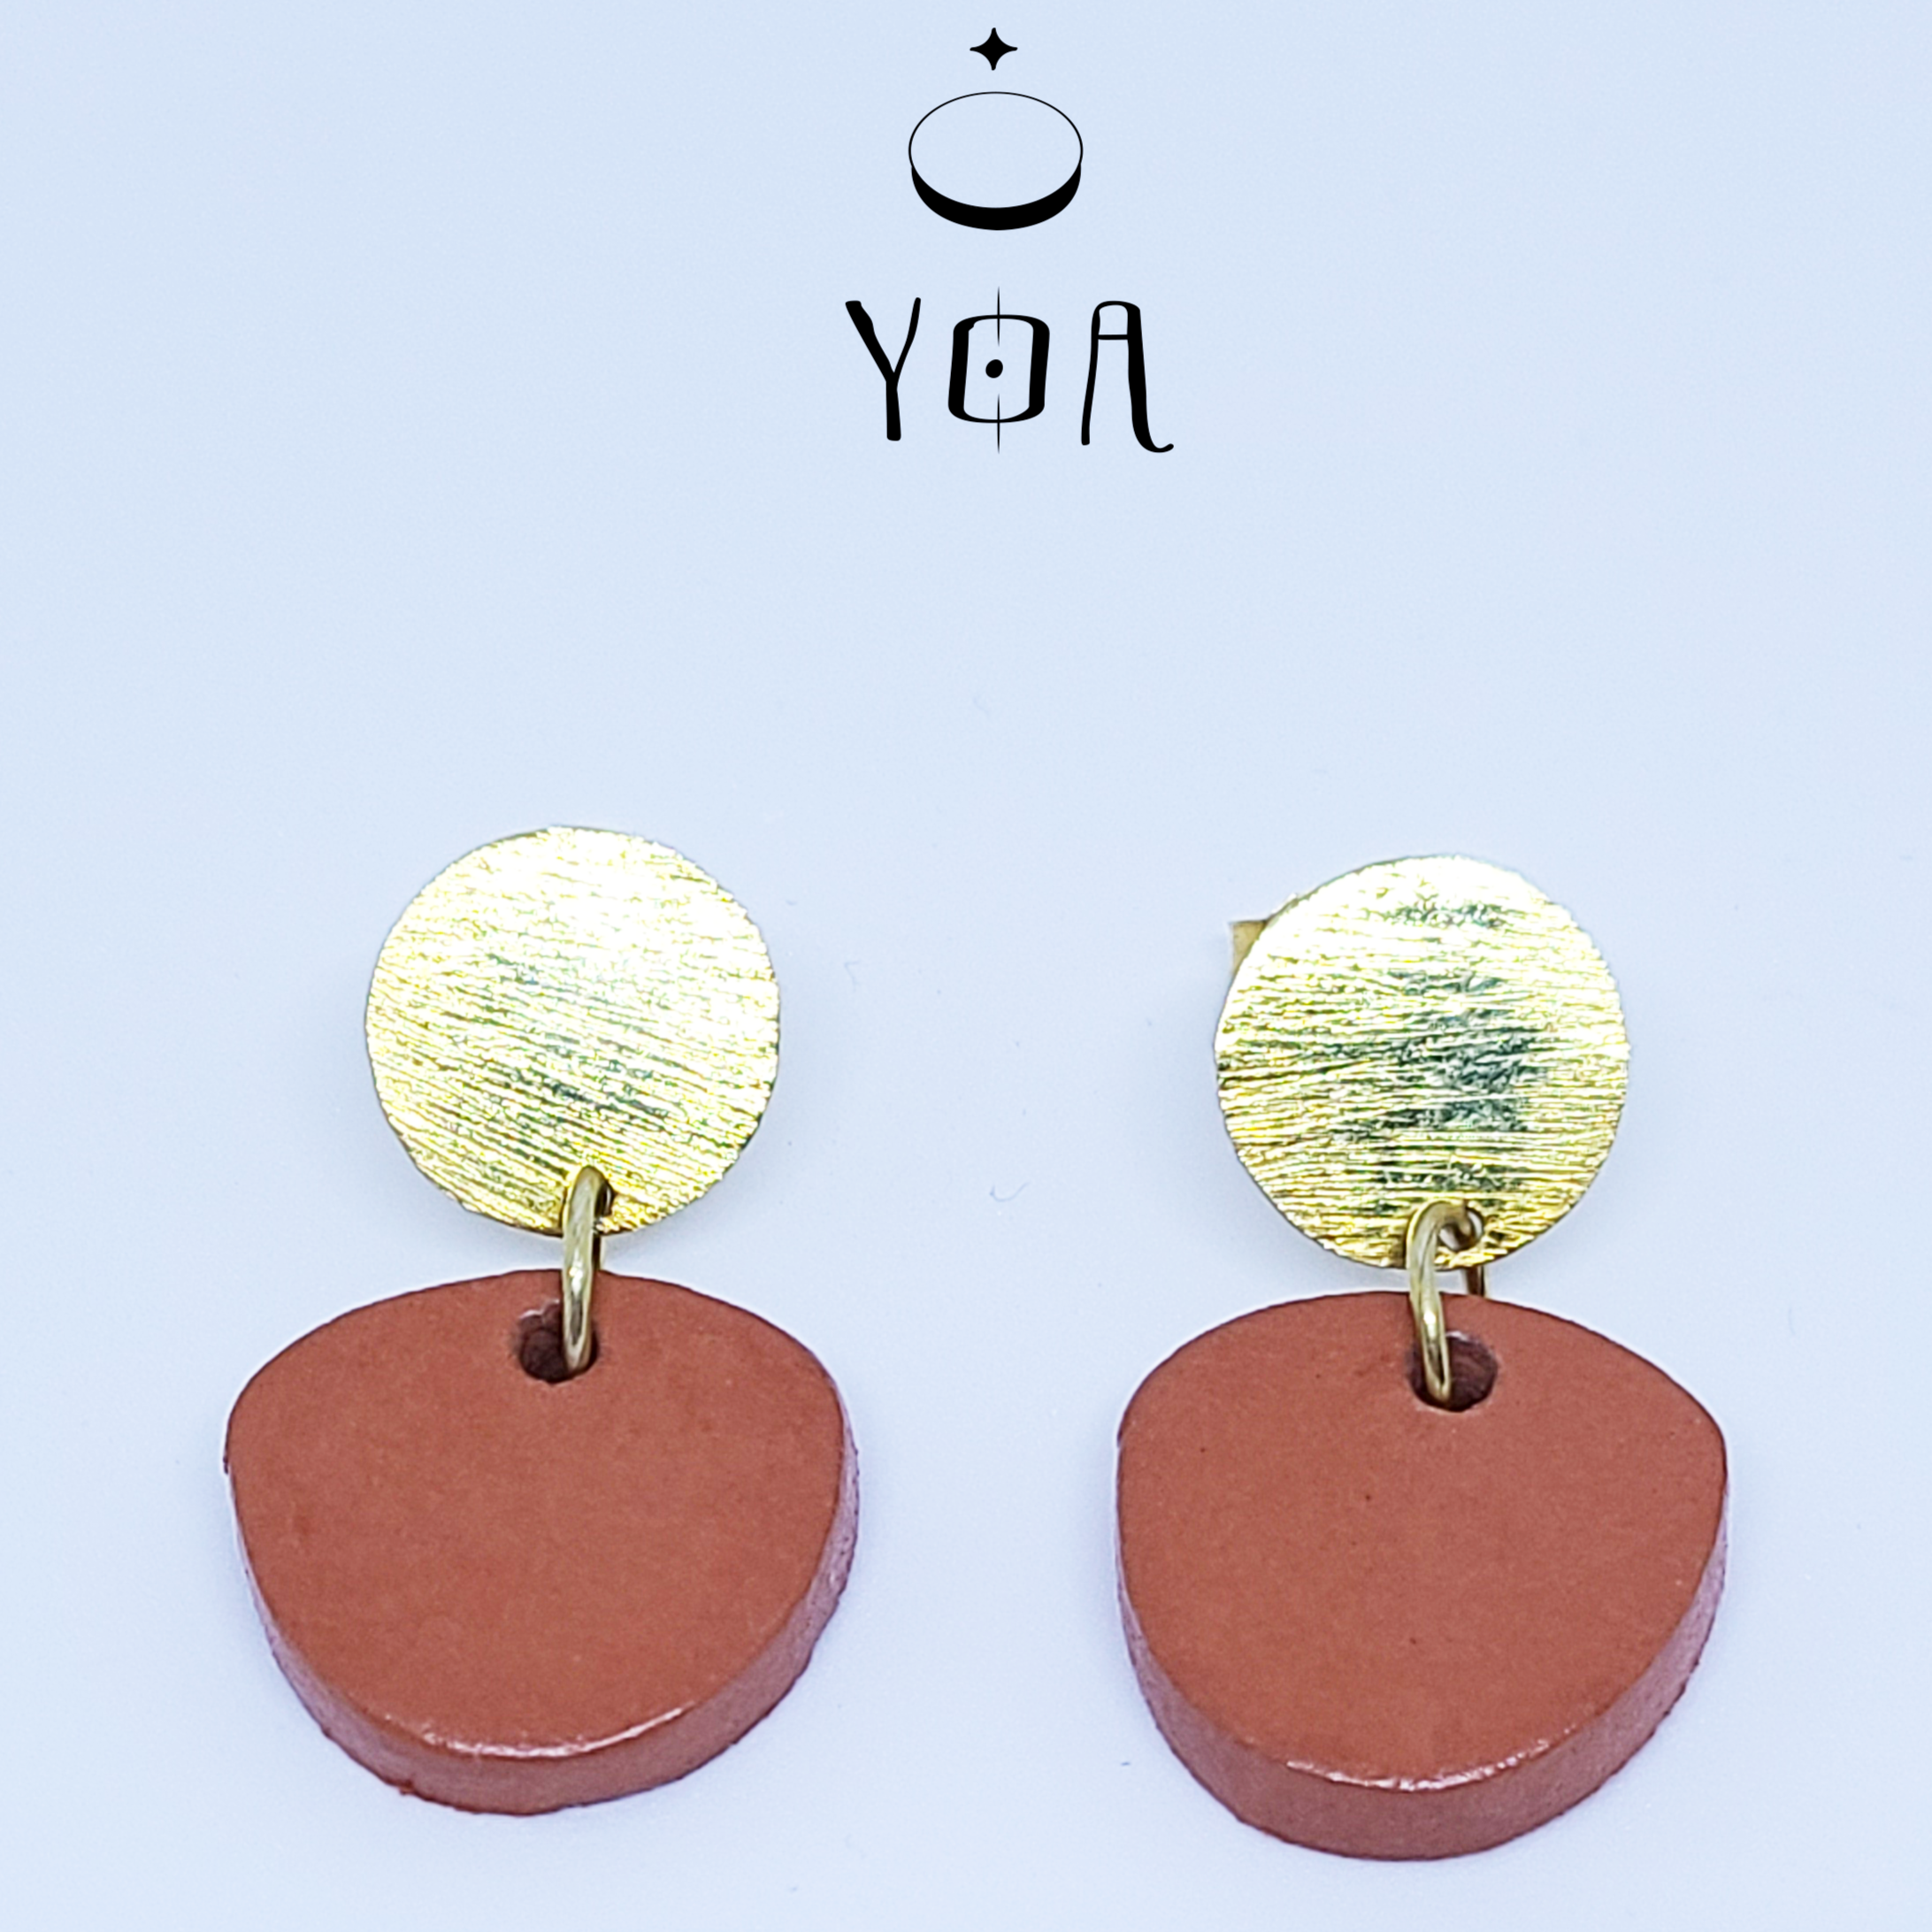 Terracotta and gold-plated silver earrings